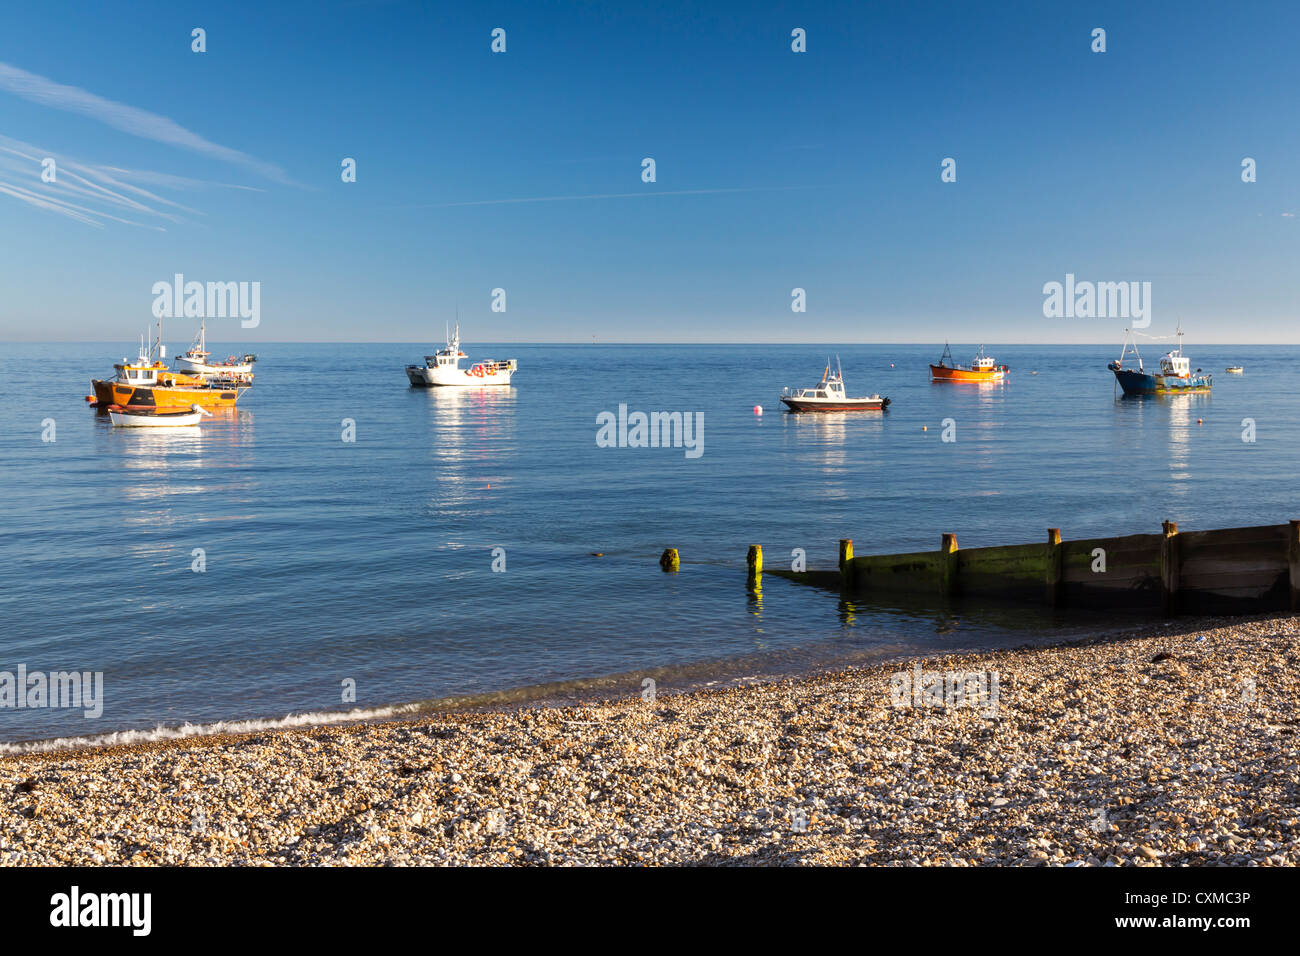 The shingle beach at Selsey Bill West Susses England UK Stock Photo